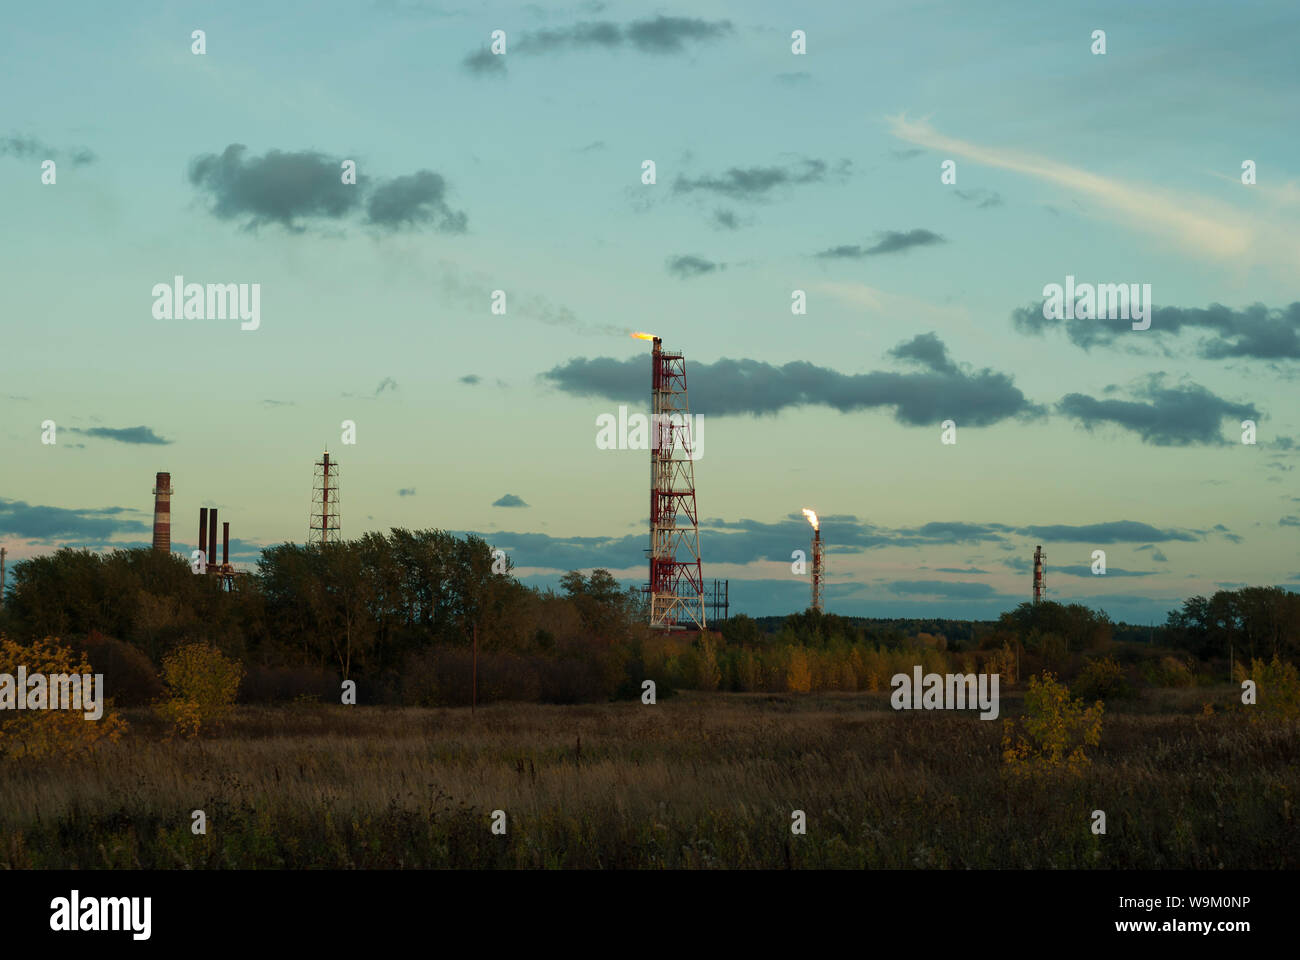 evening industrial landscape - flares for flaring associated gas in an oil field Stock Photo